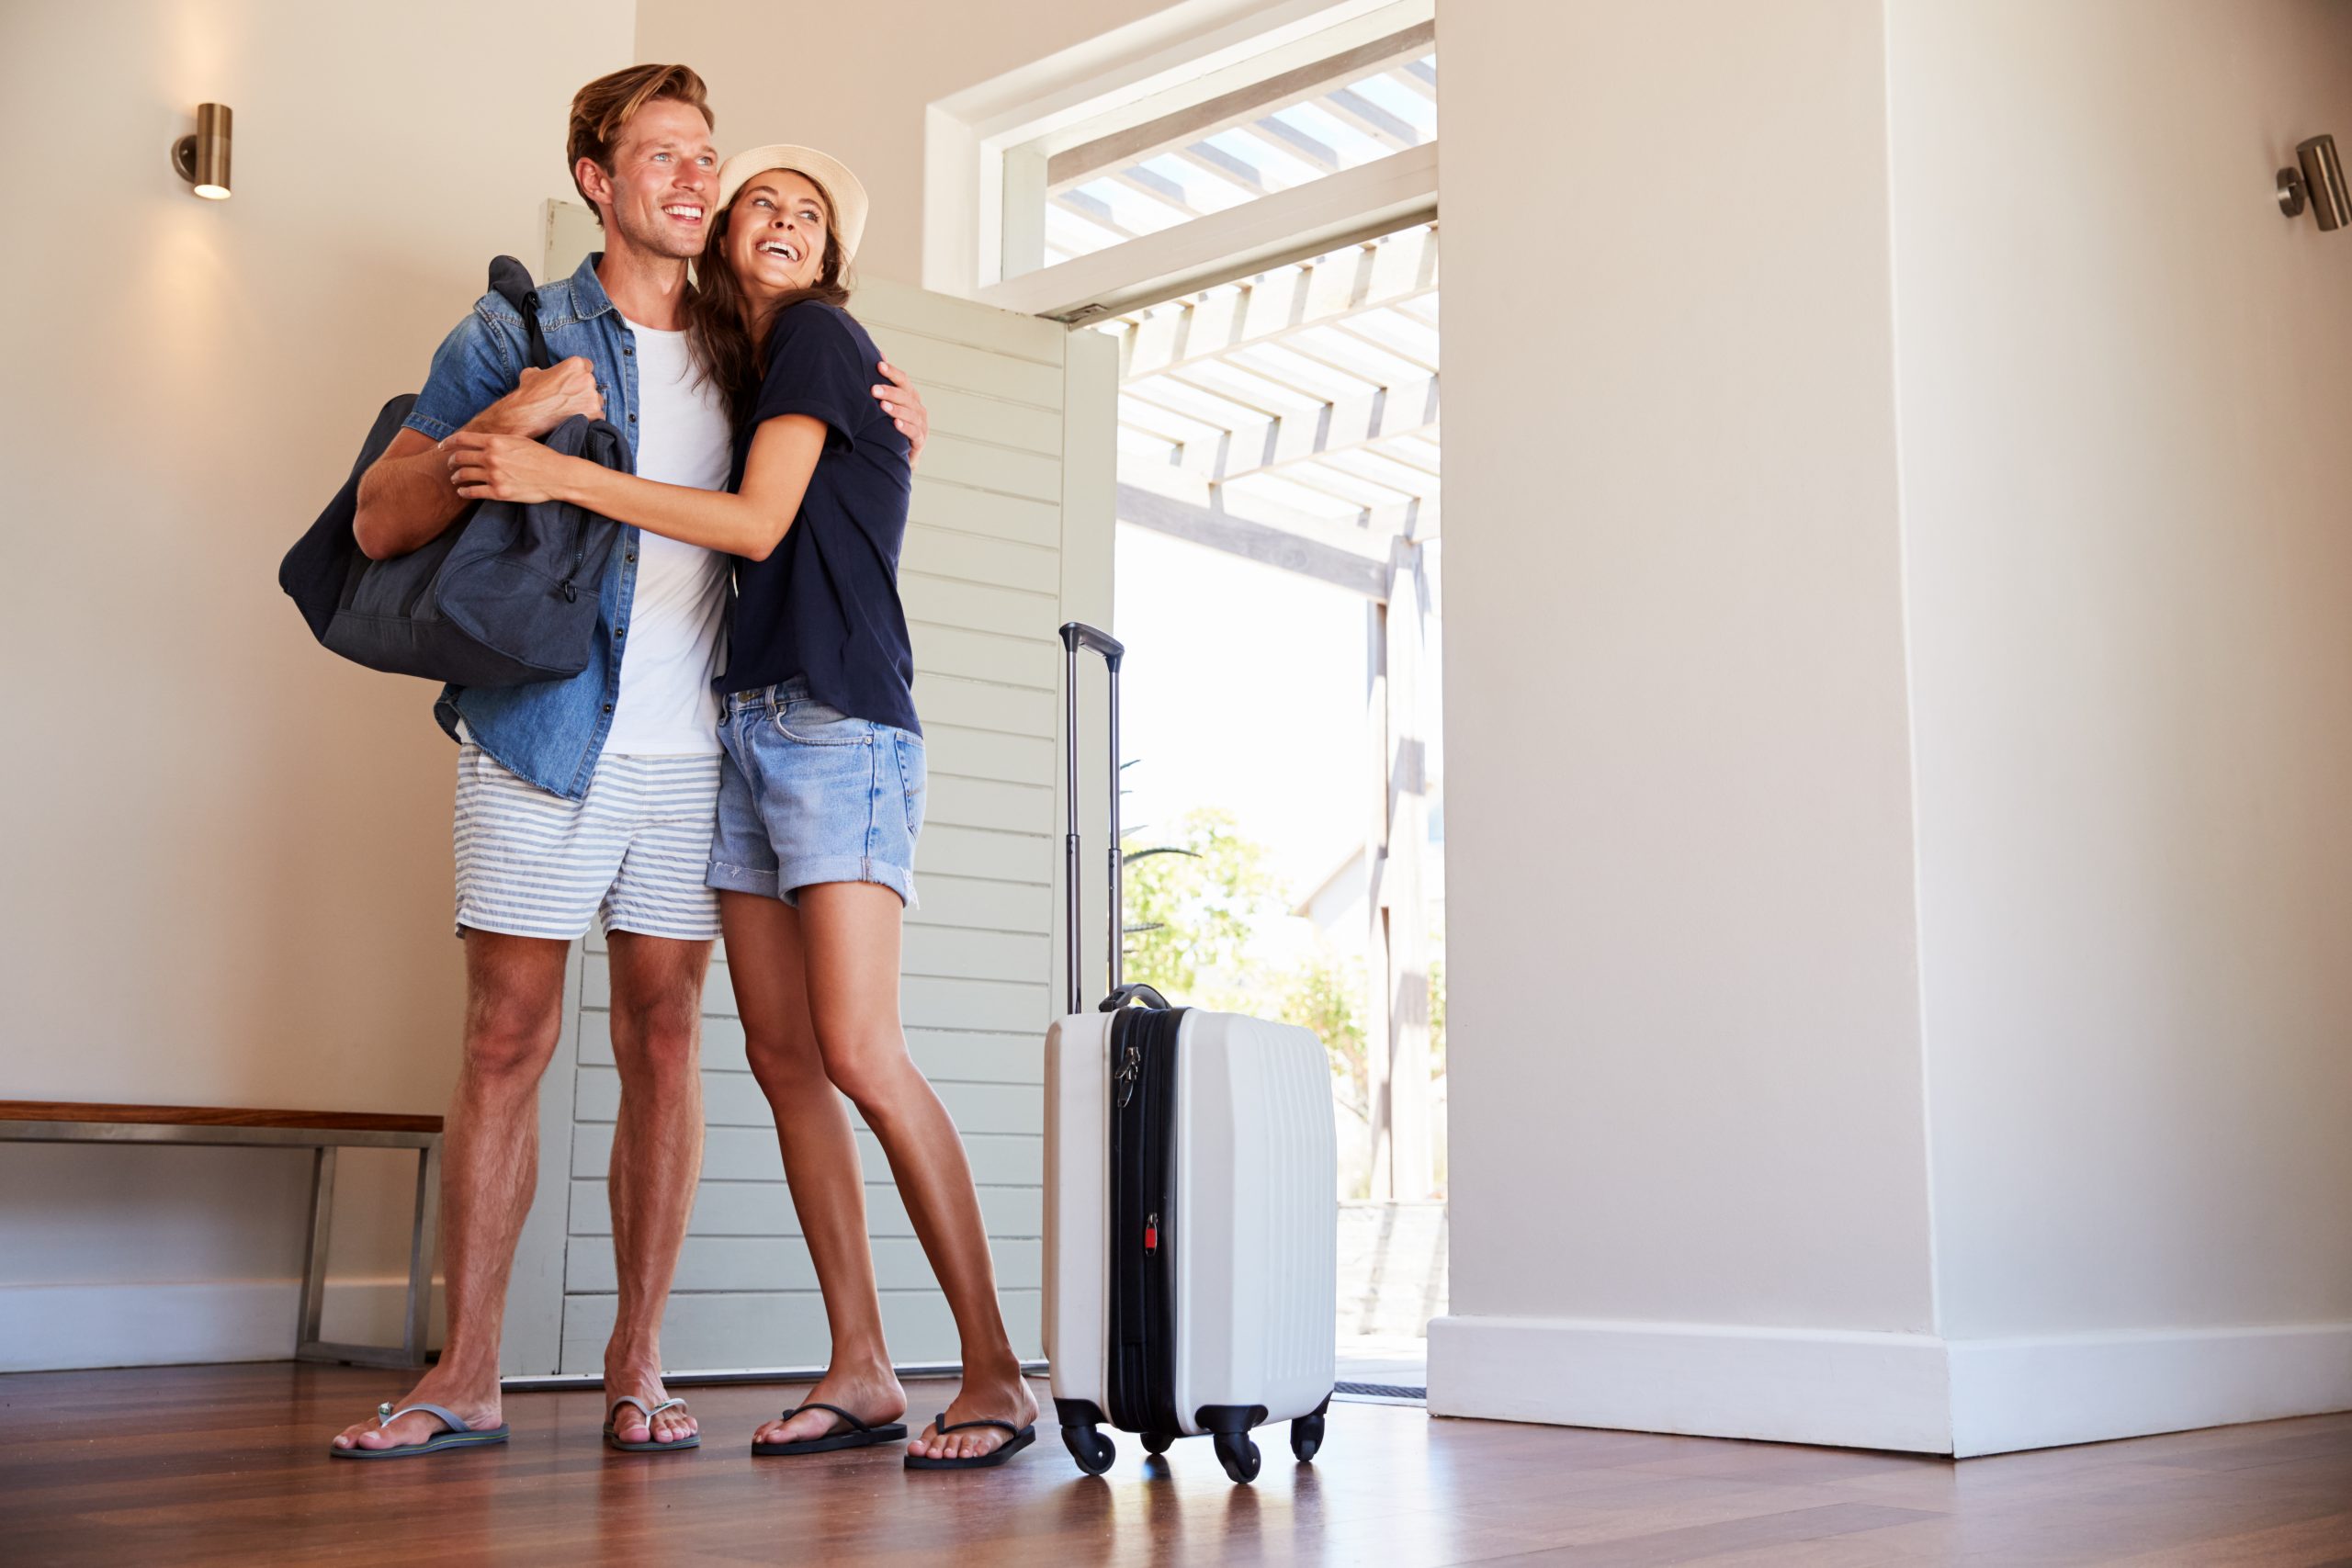 Top Hot Tips to Finding a Vacation Home Rental